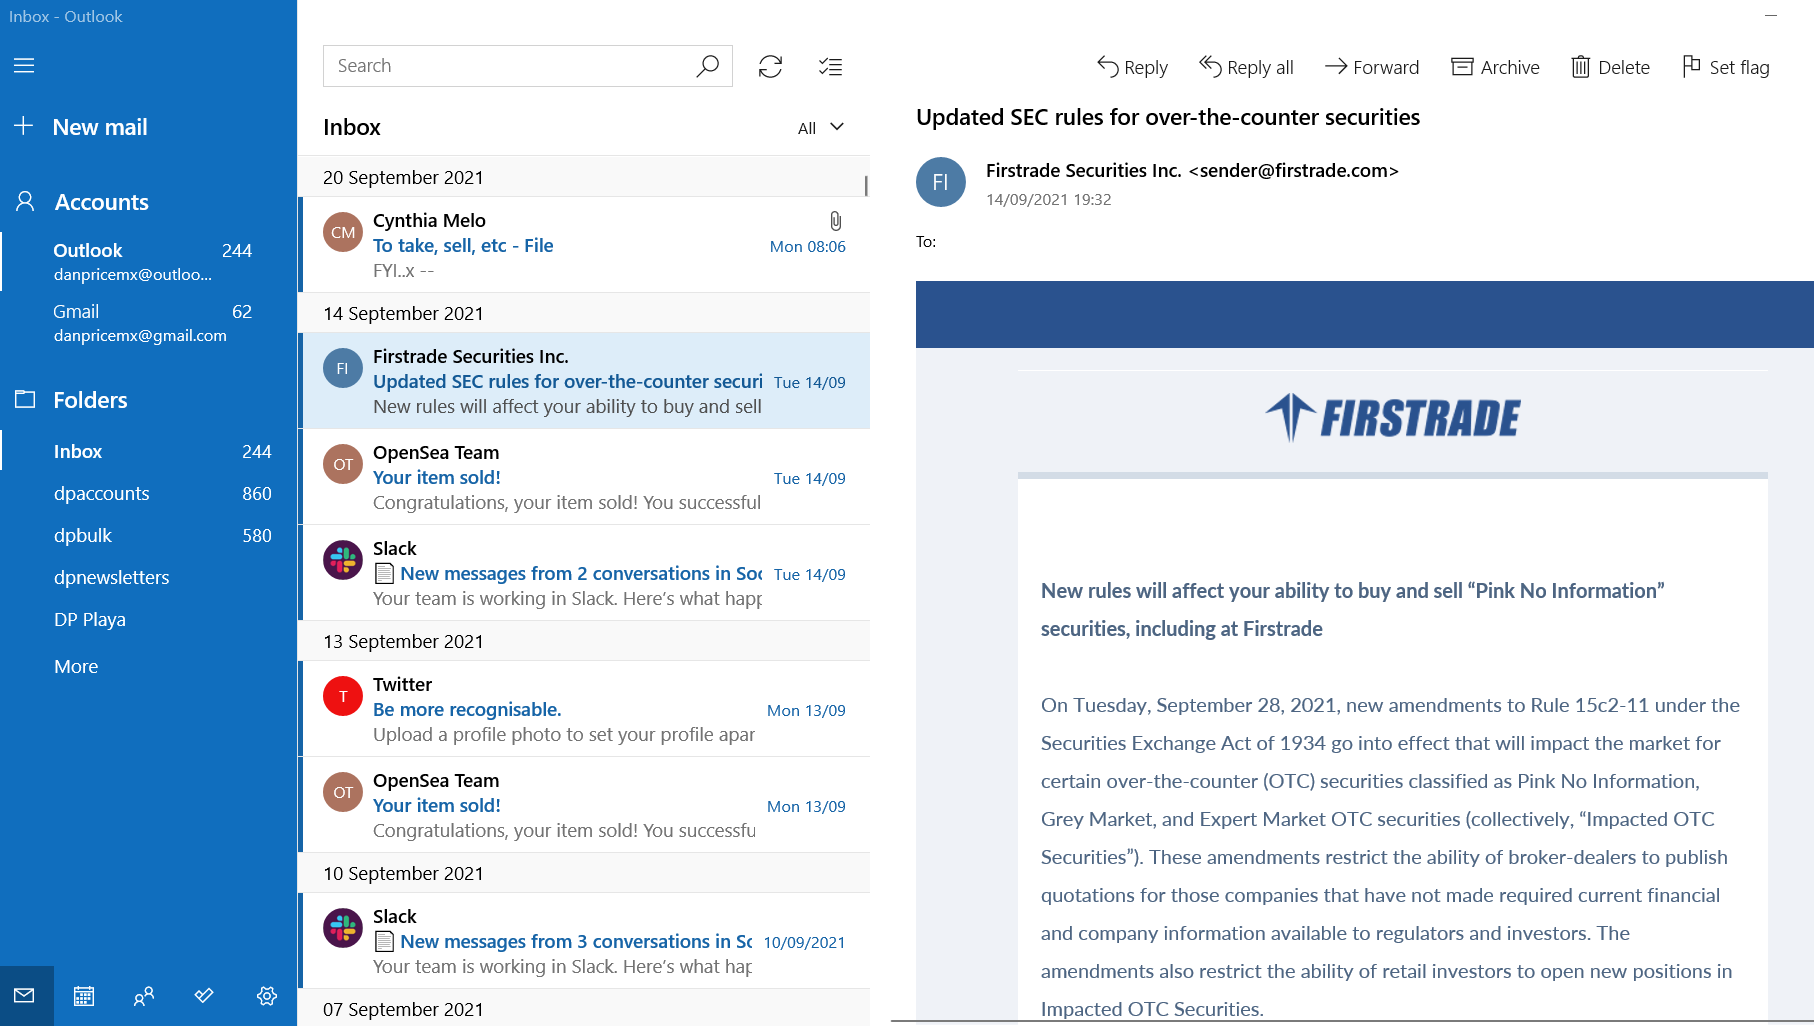 The Mail app in Windows 10